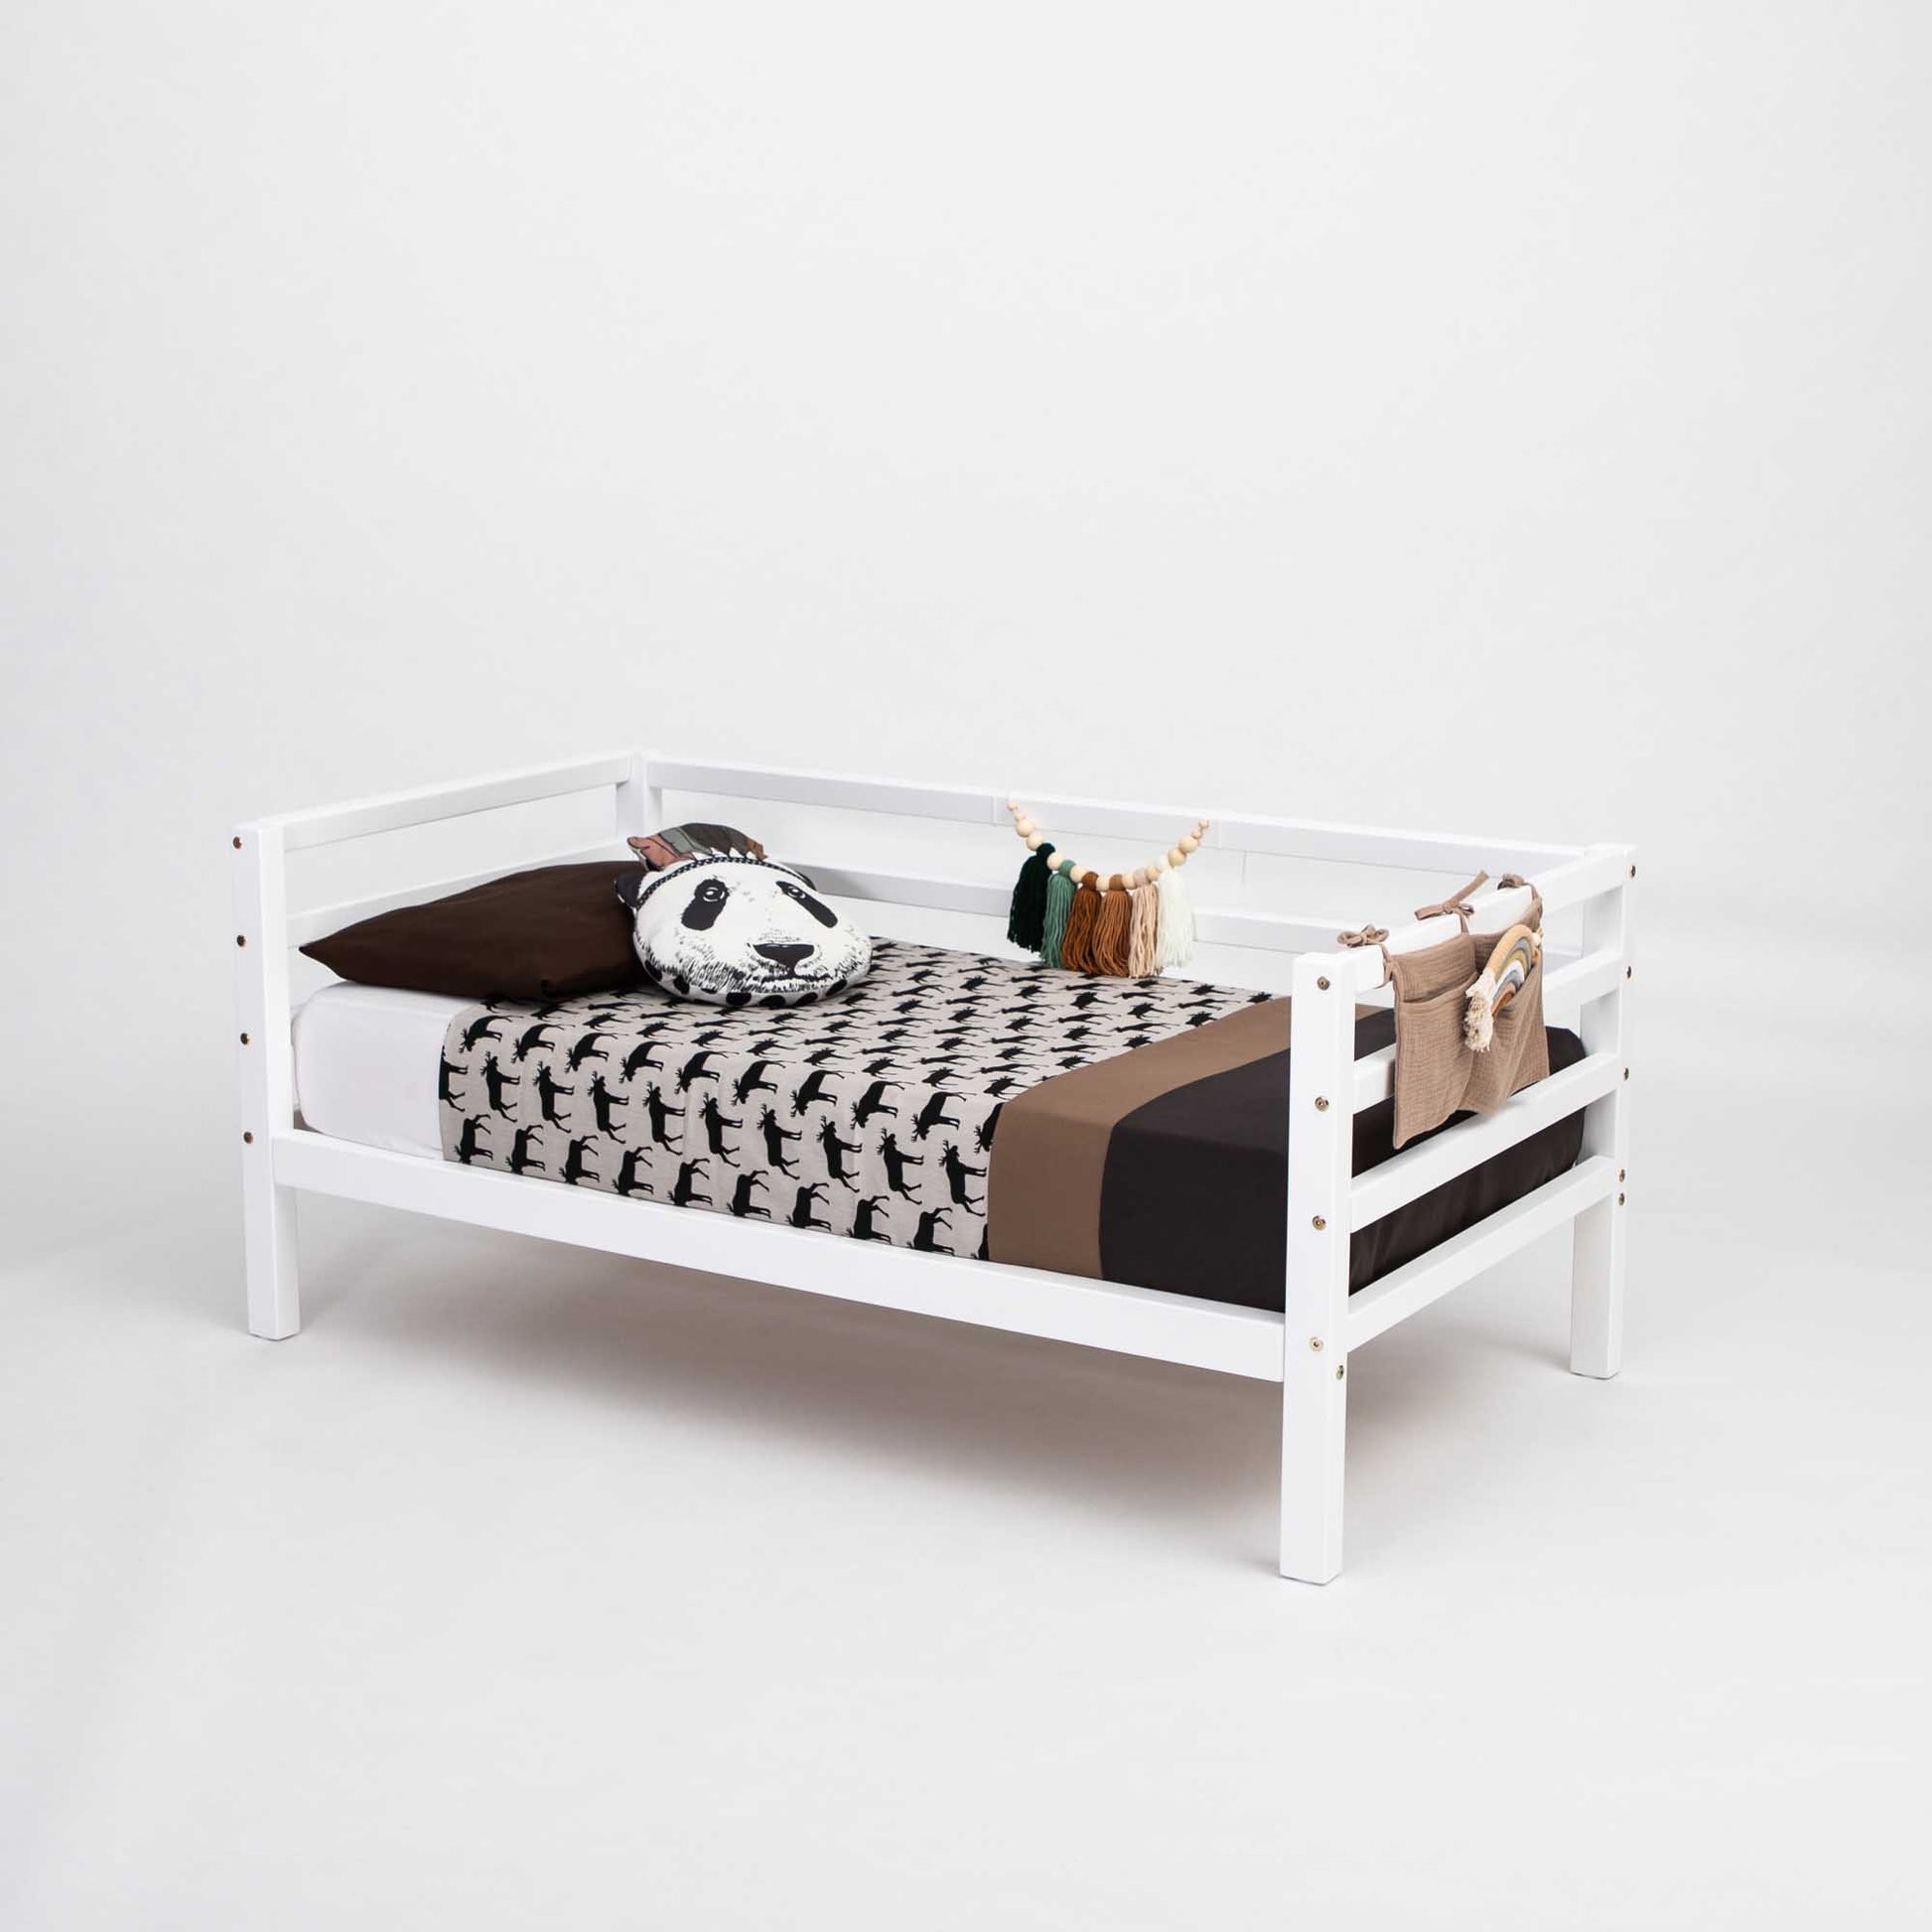 A Kids' Bed on Legs with a 3-Sided Horizontal Rail from Sweet Home From Wood, with a soccer ball on it.